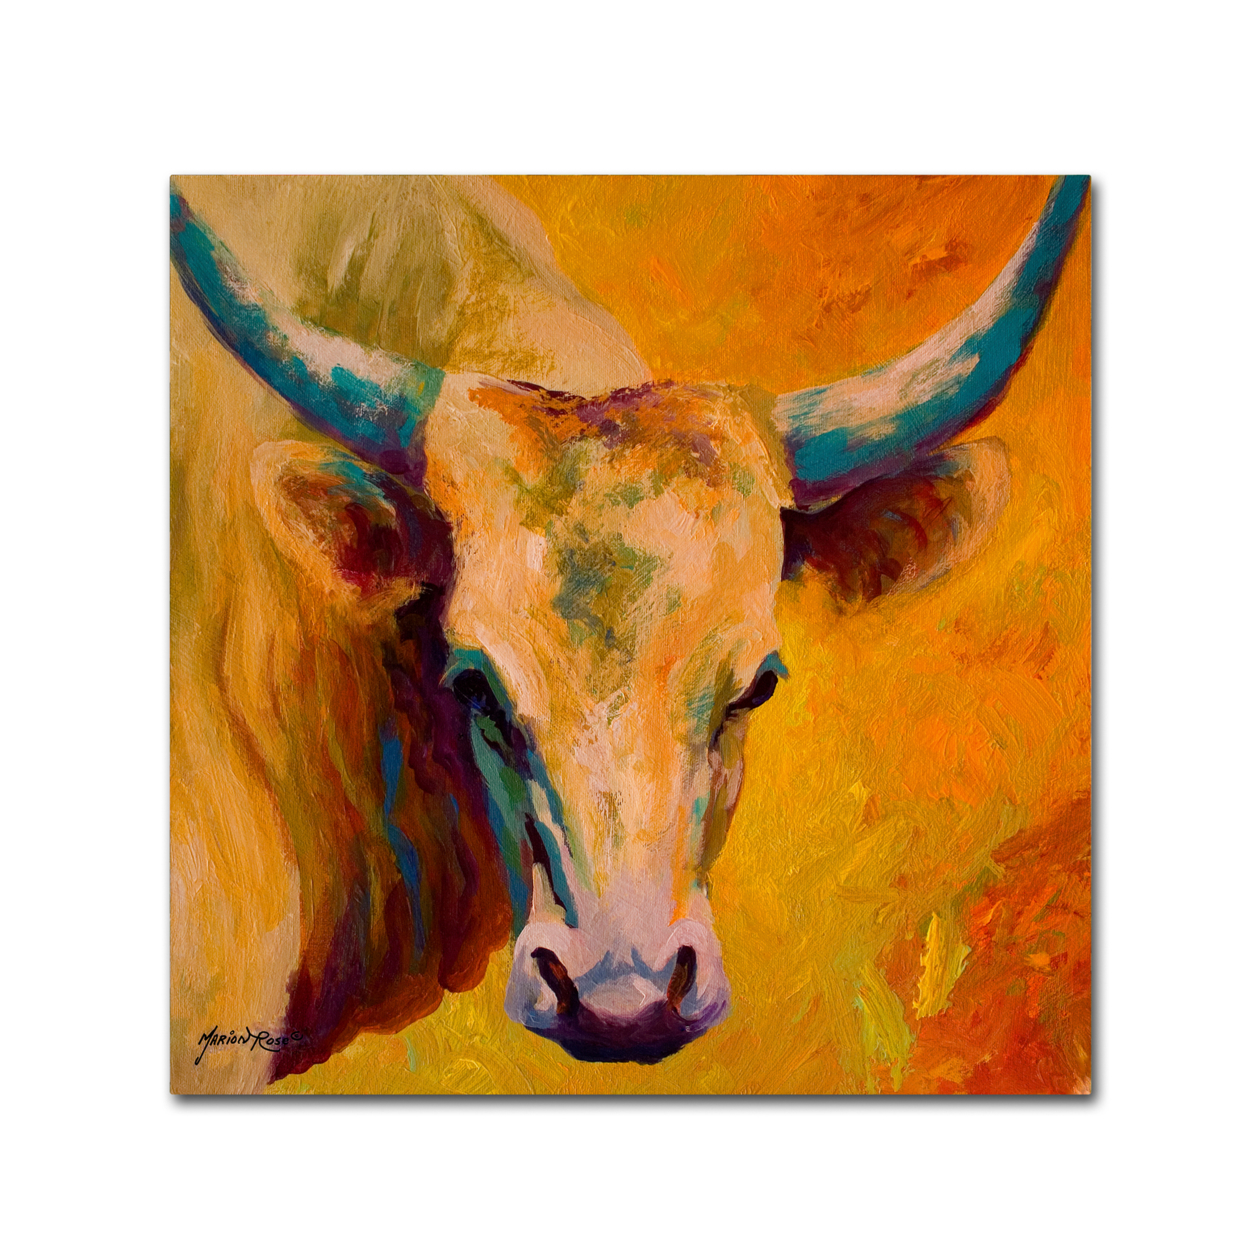 Marion Rose 'Creamy Texan' Ready To Hang Canvas Art 35 X 35 Inches Made In USA